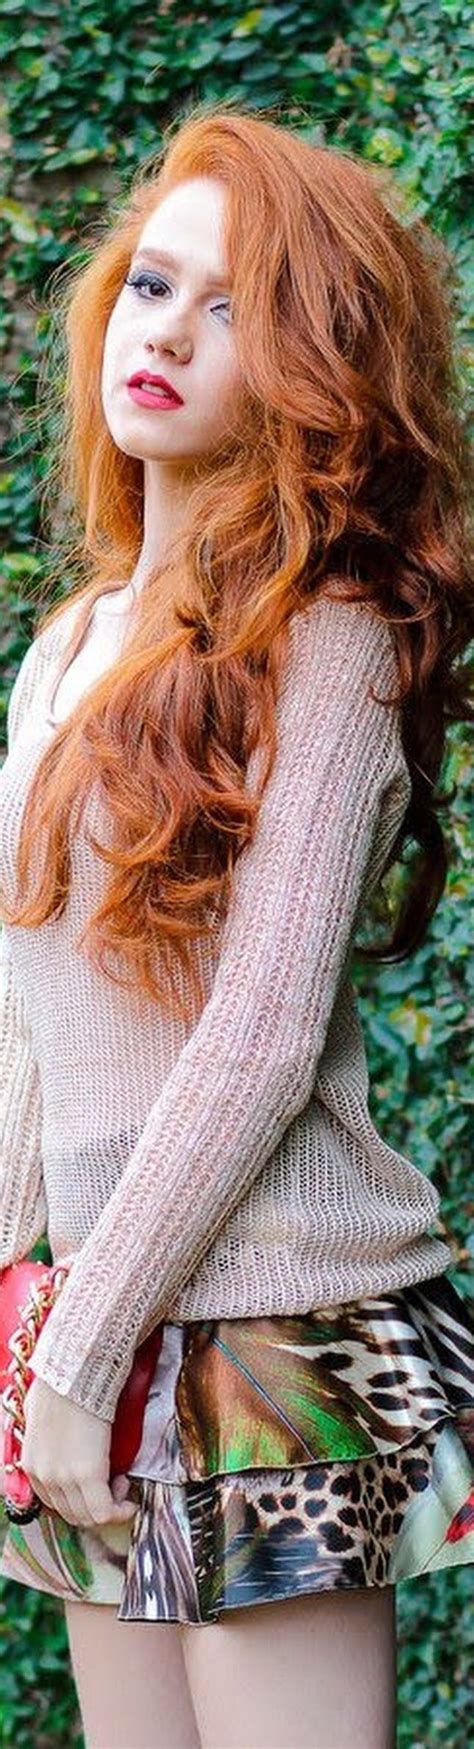 Pin By Hettiën On Red Hair Flaming Beauties Red Hair Beauty Hair